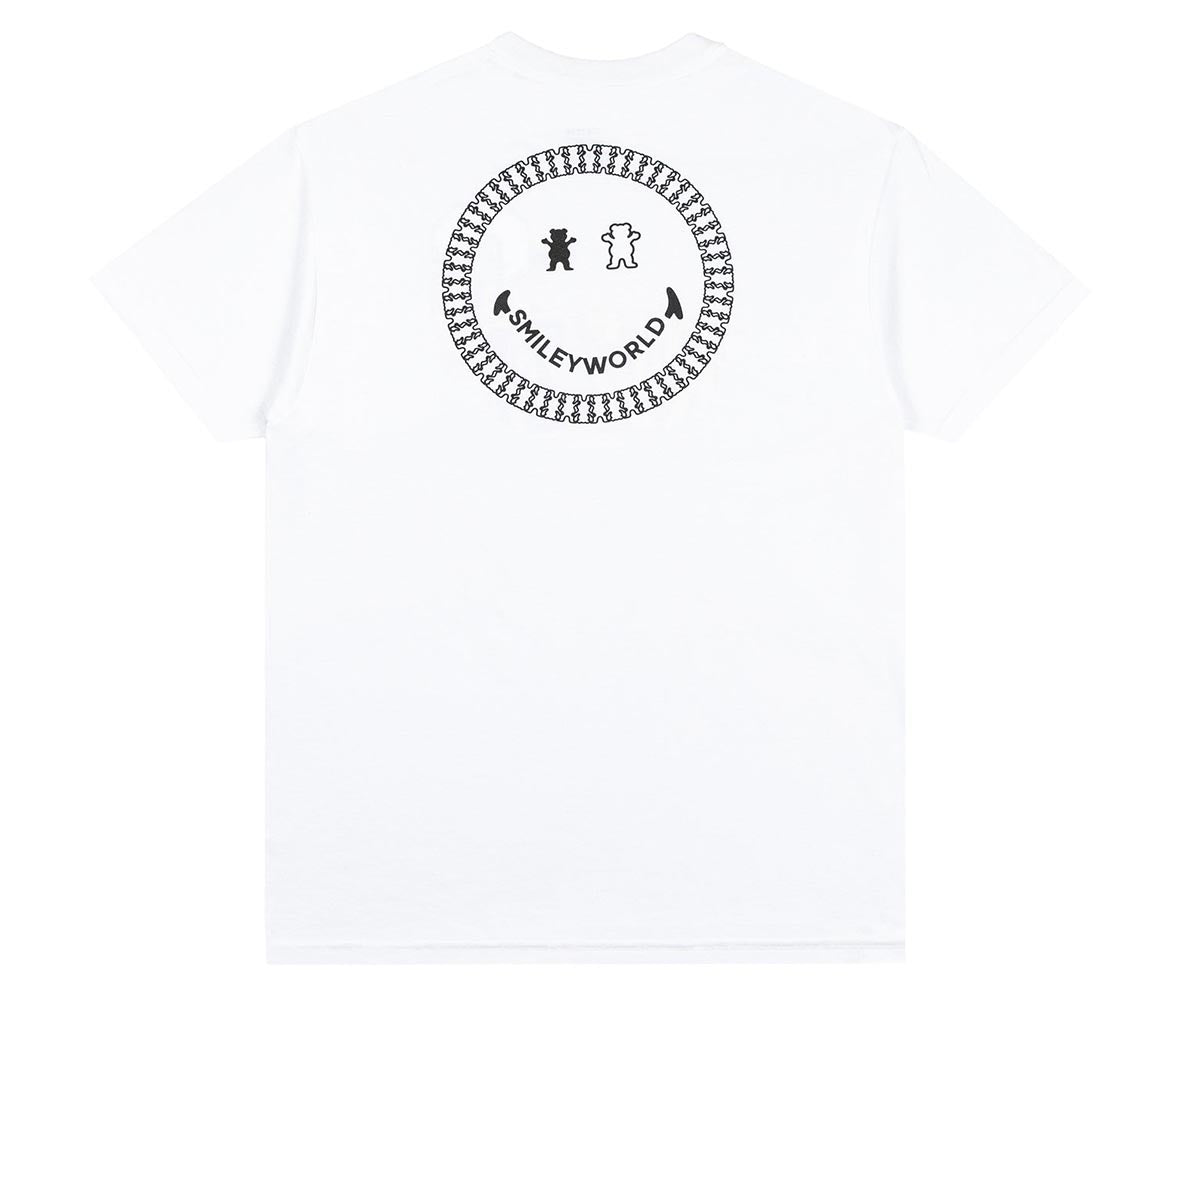 Grizzly x Smiley World School Of Happiness T-Shirt - White image 2